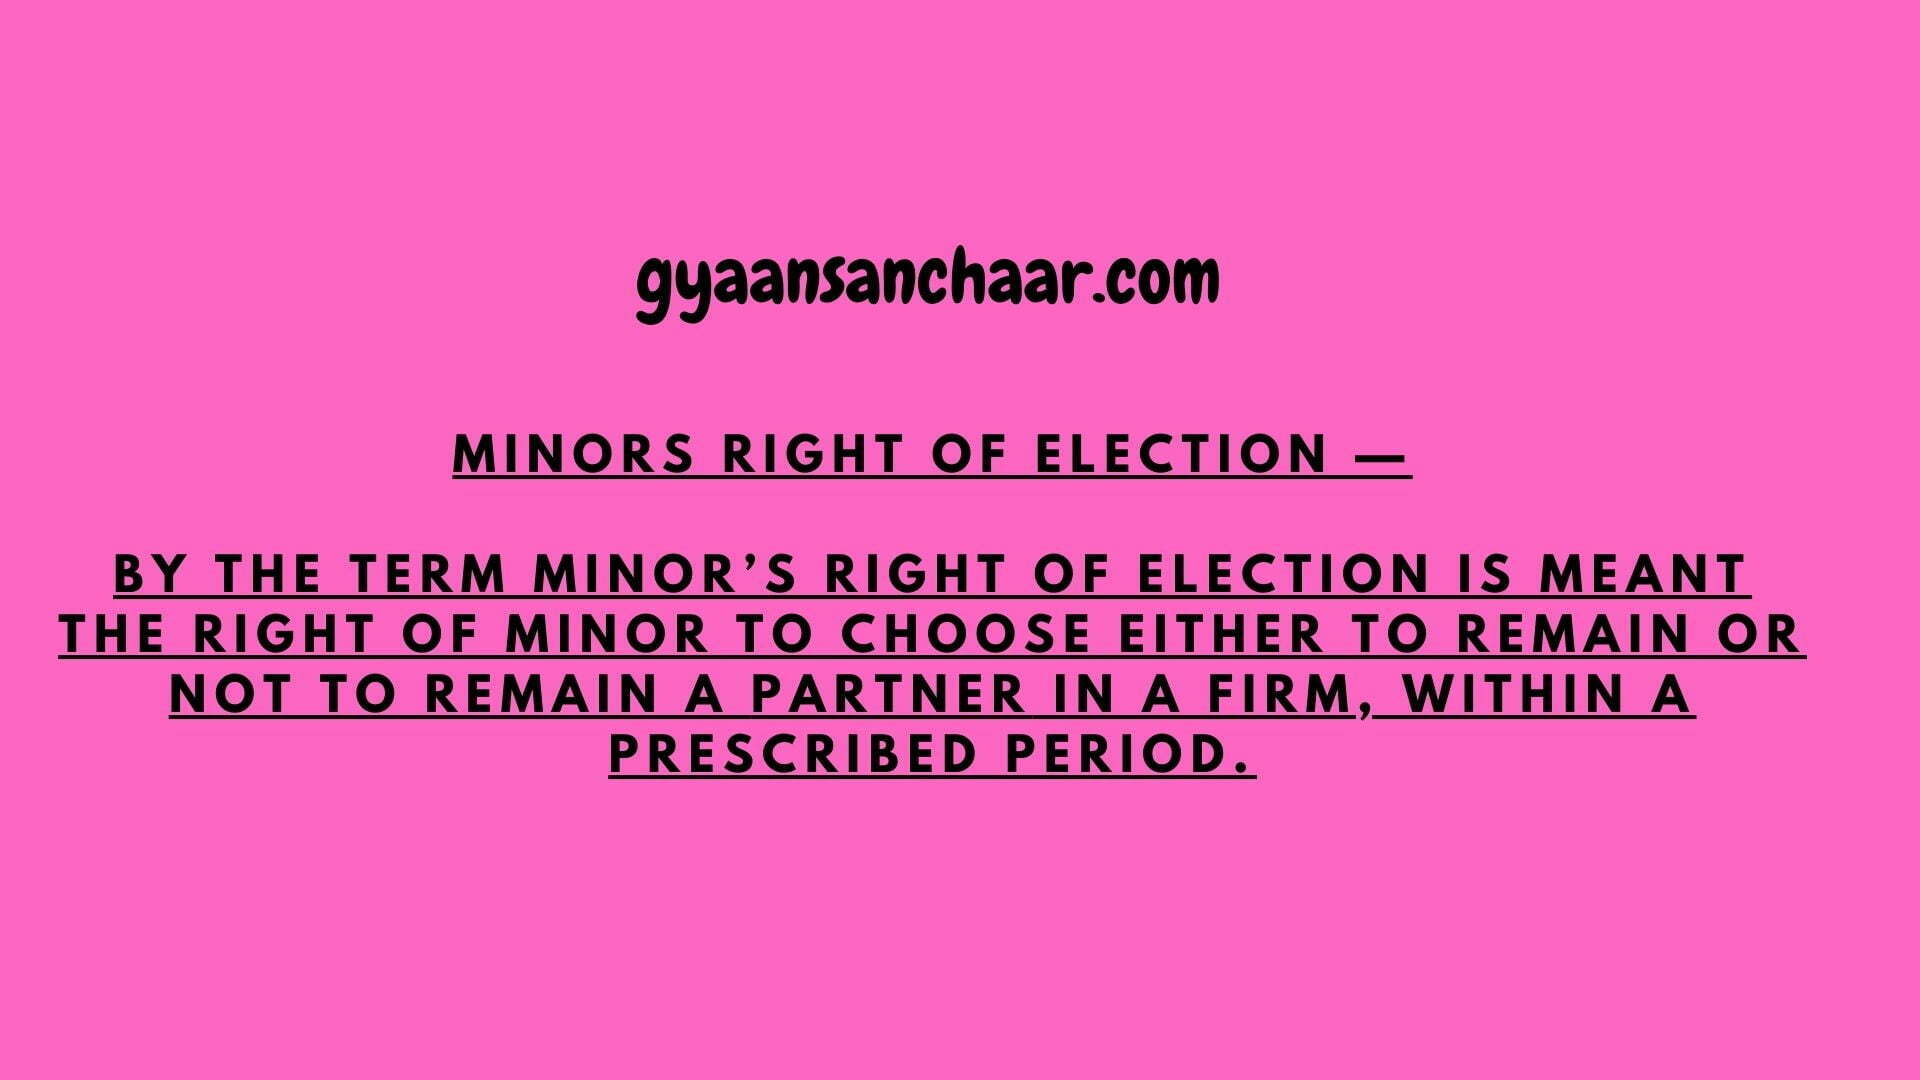 Minors right of election